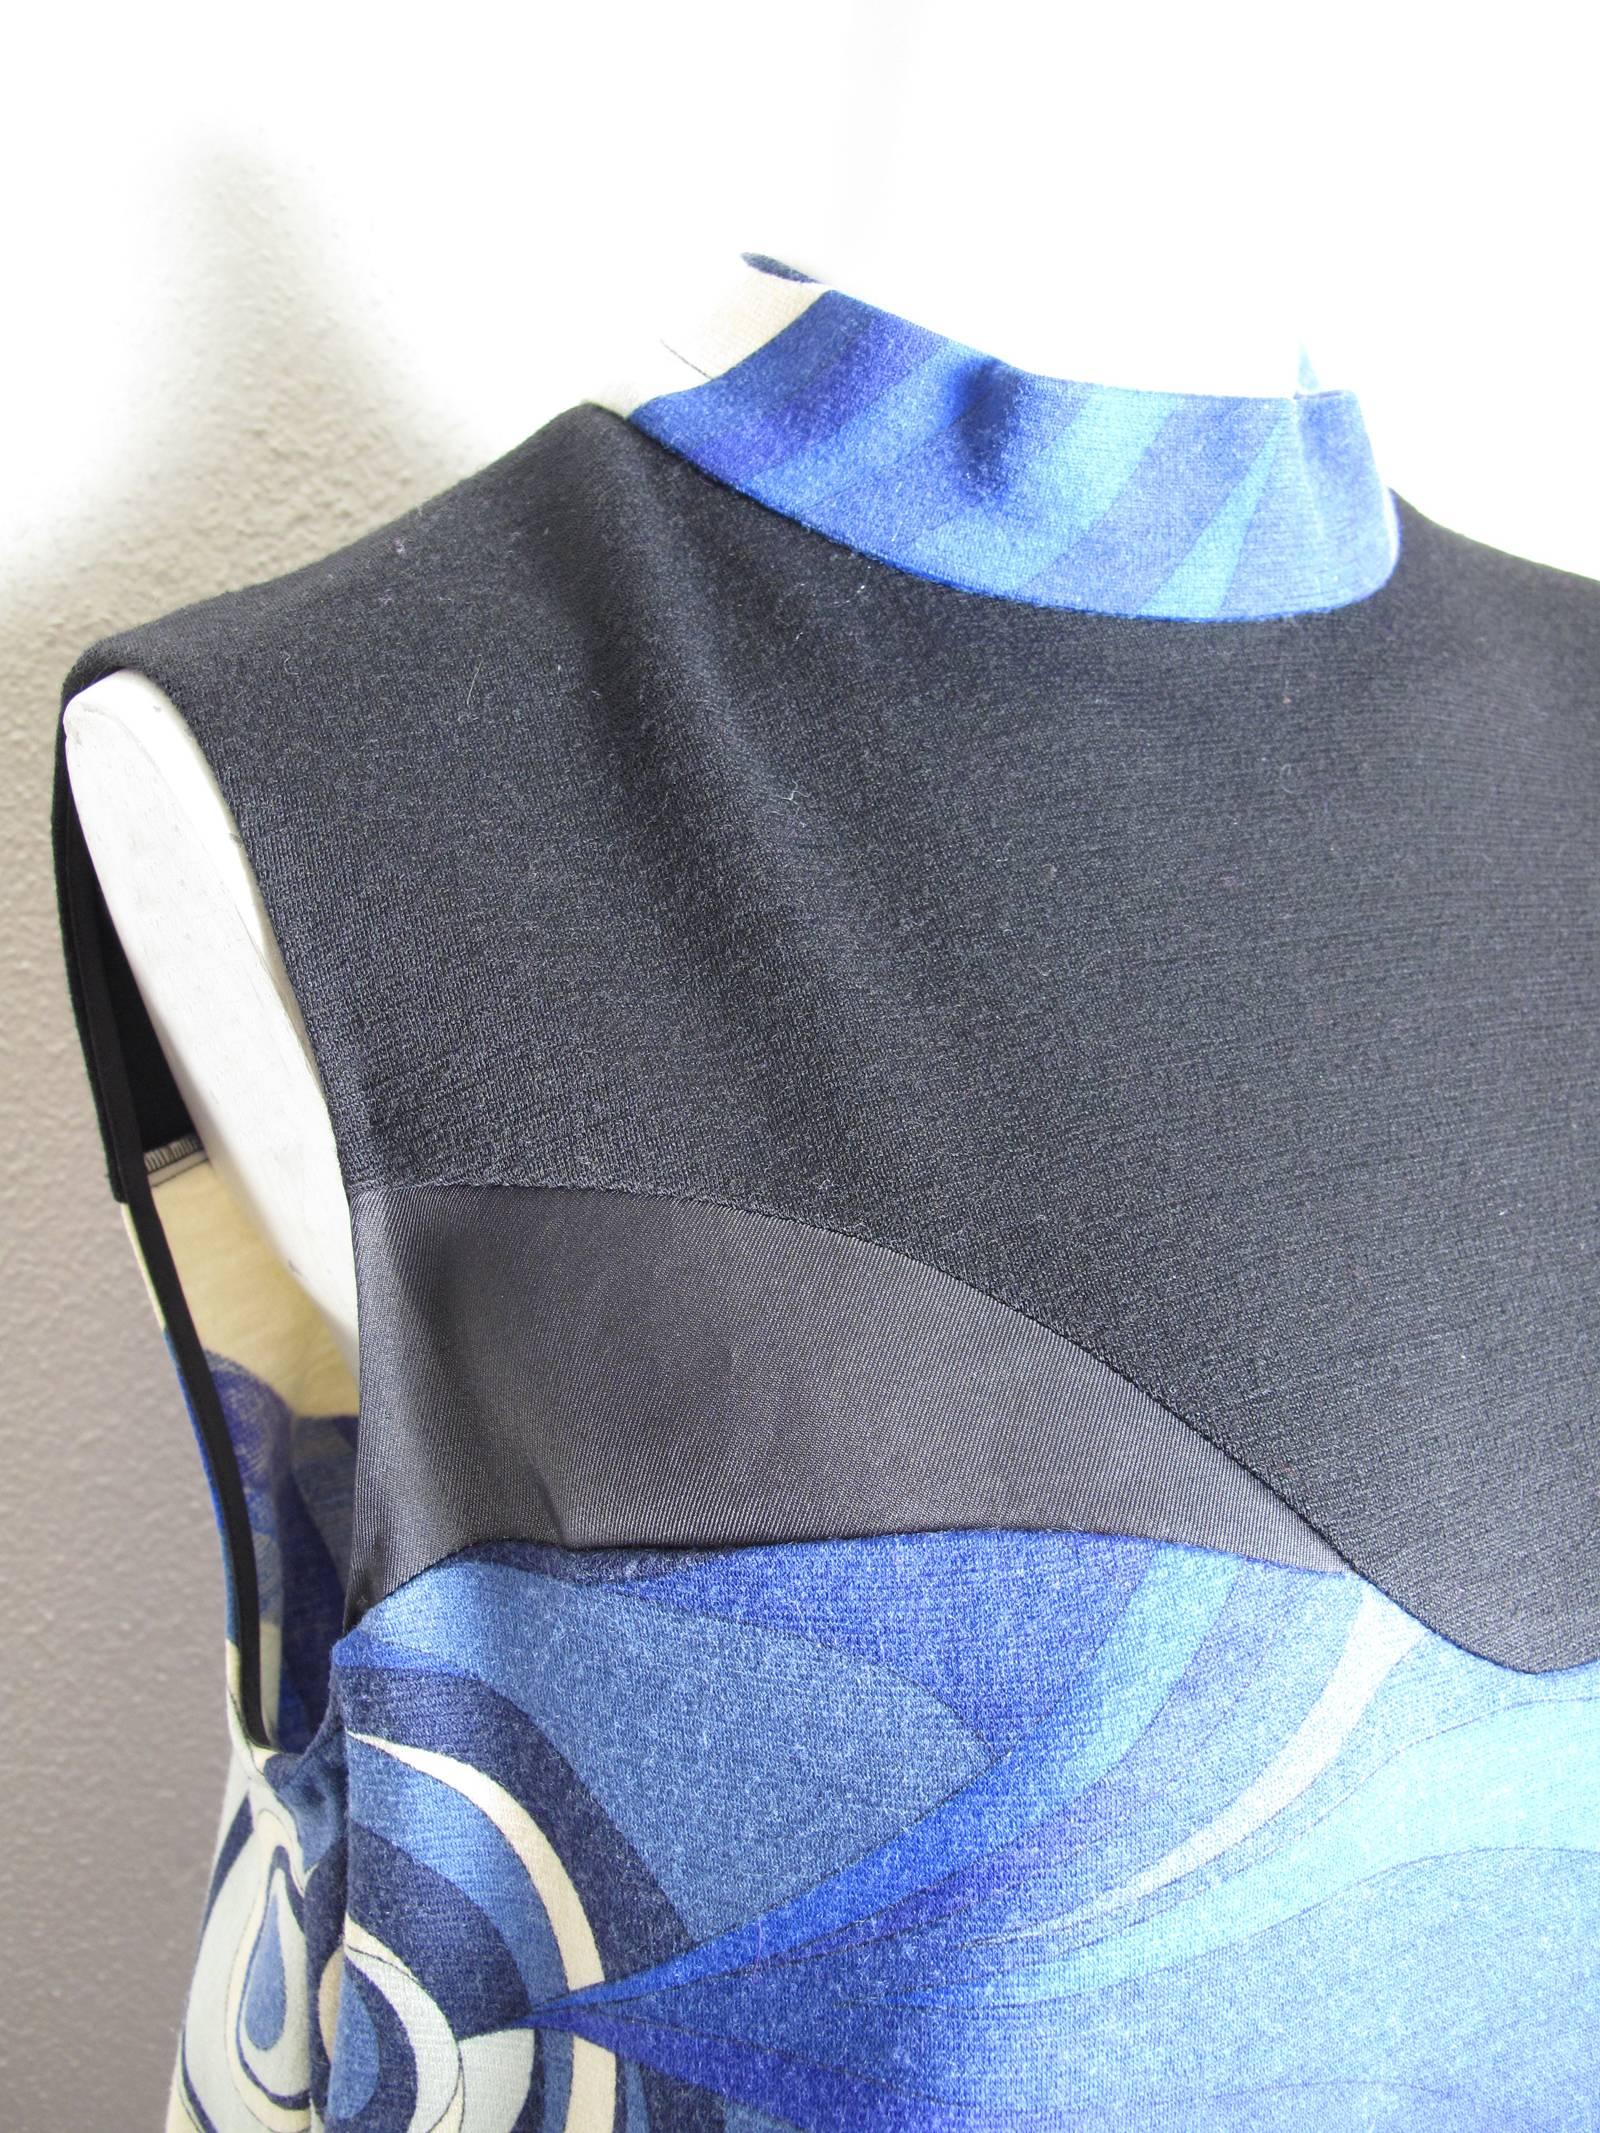 Pucci blue , off white, black wool sleeveless dress with black sheer panels. Condition: Excellent. Size 12